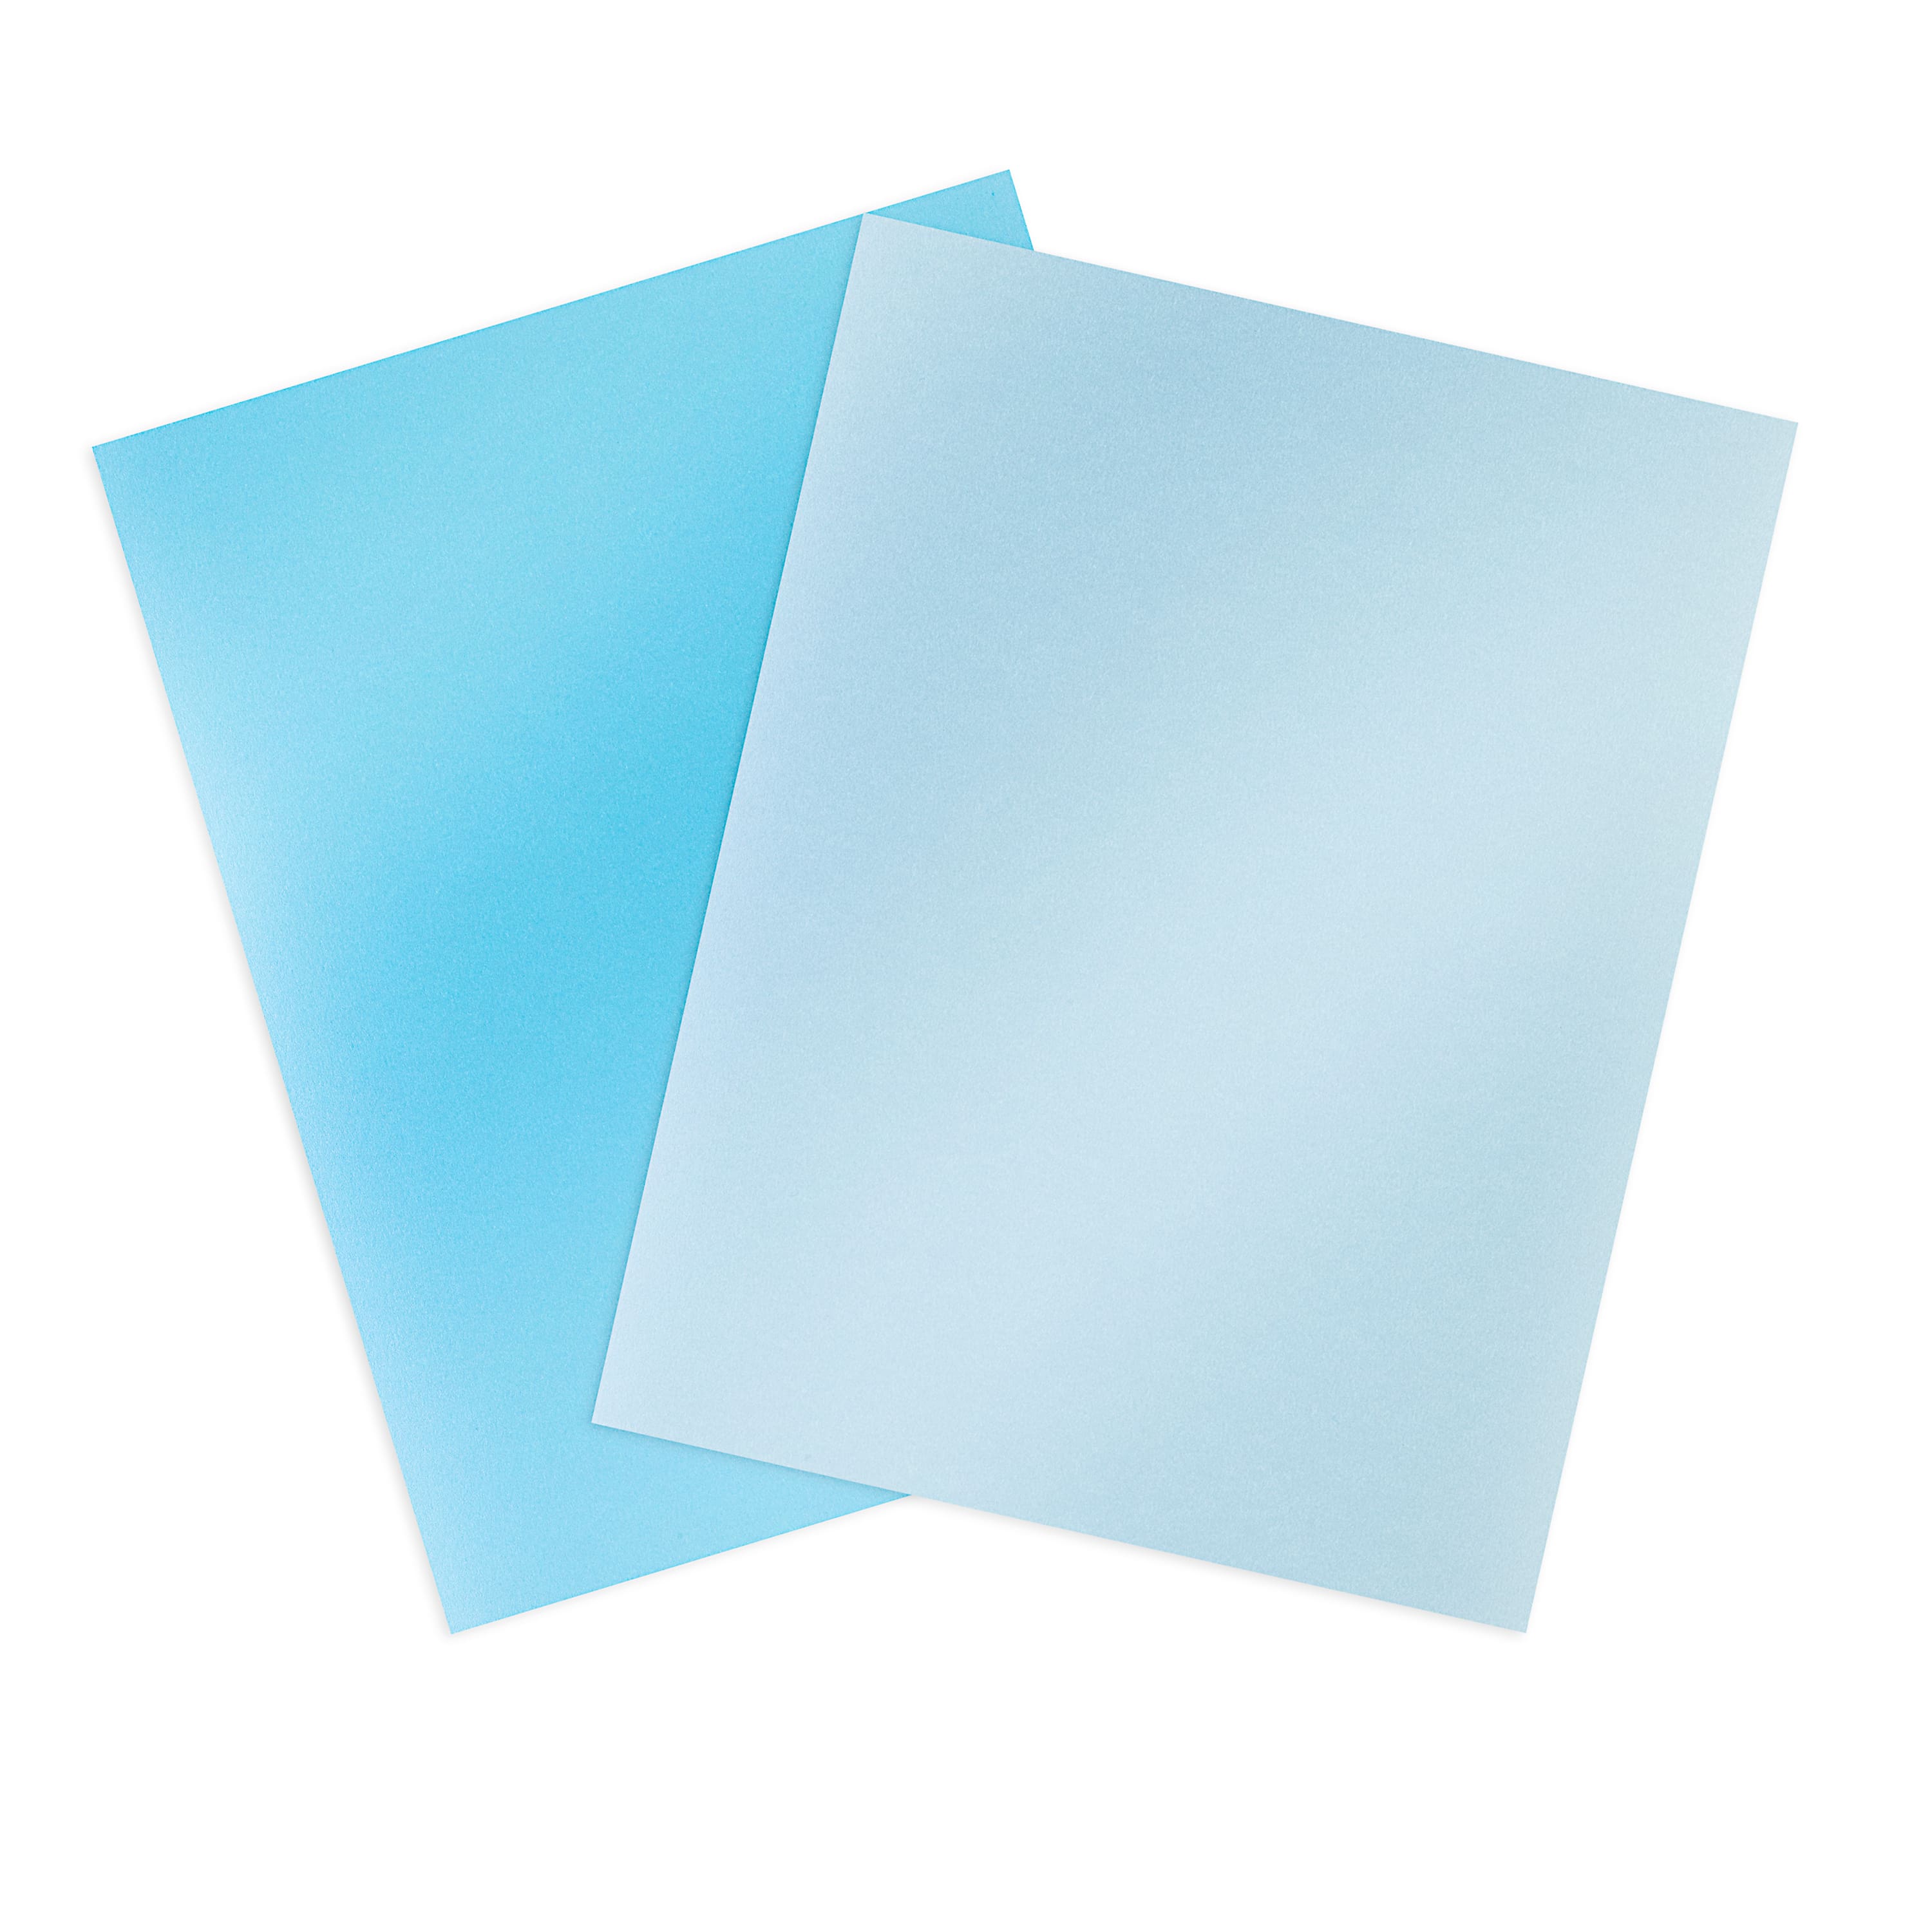 Light Cadet Blue Cardstock - 8.5 x 11 inch - 100Lb Cover - 25 Sheets -  Clear Path Paper